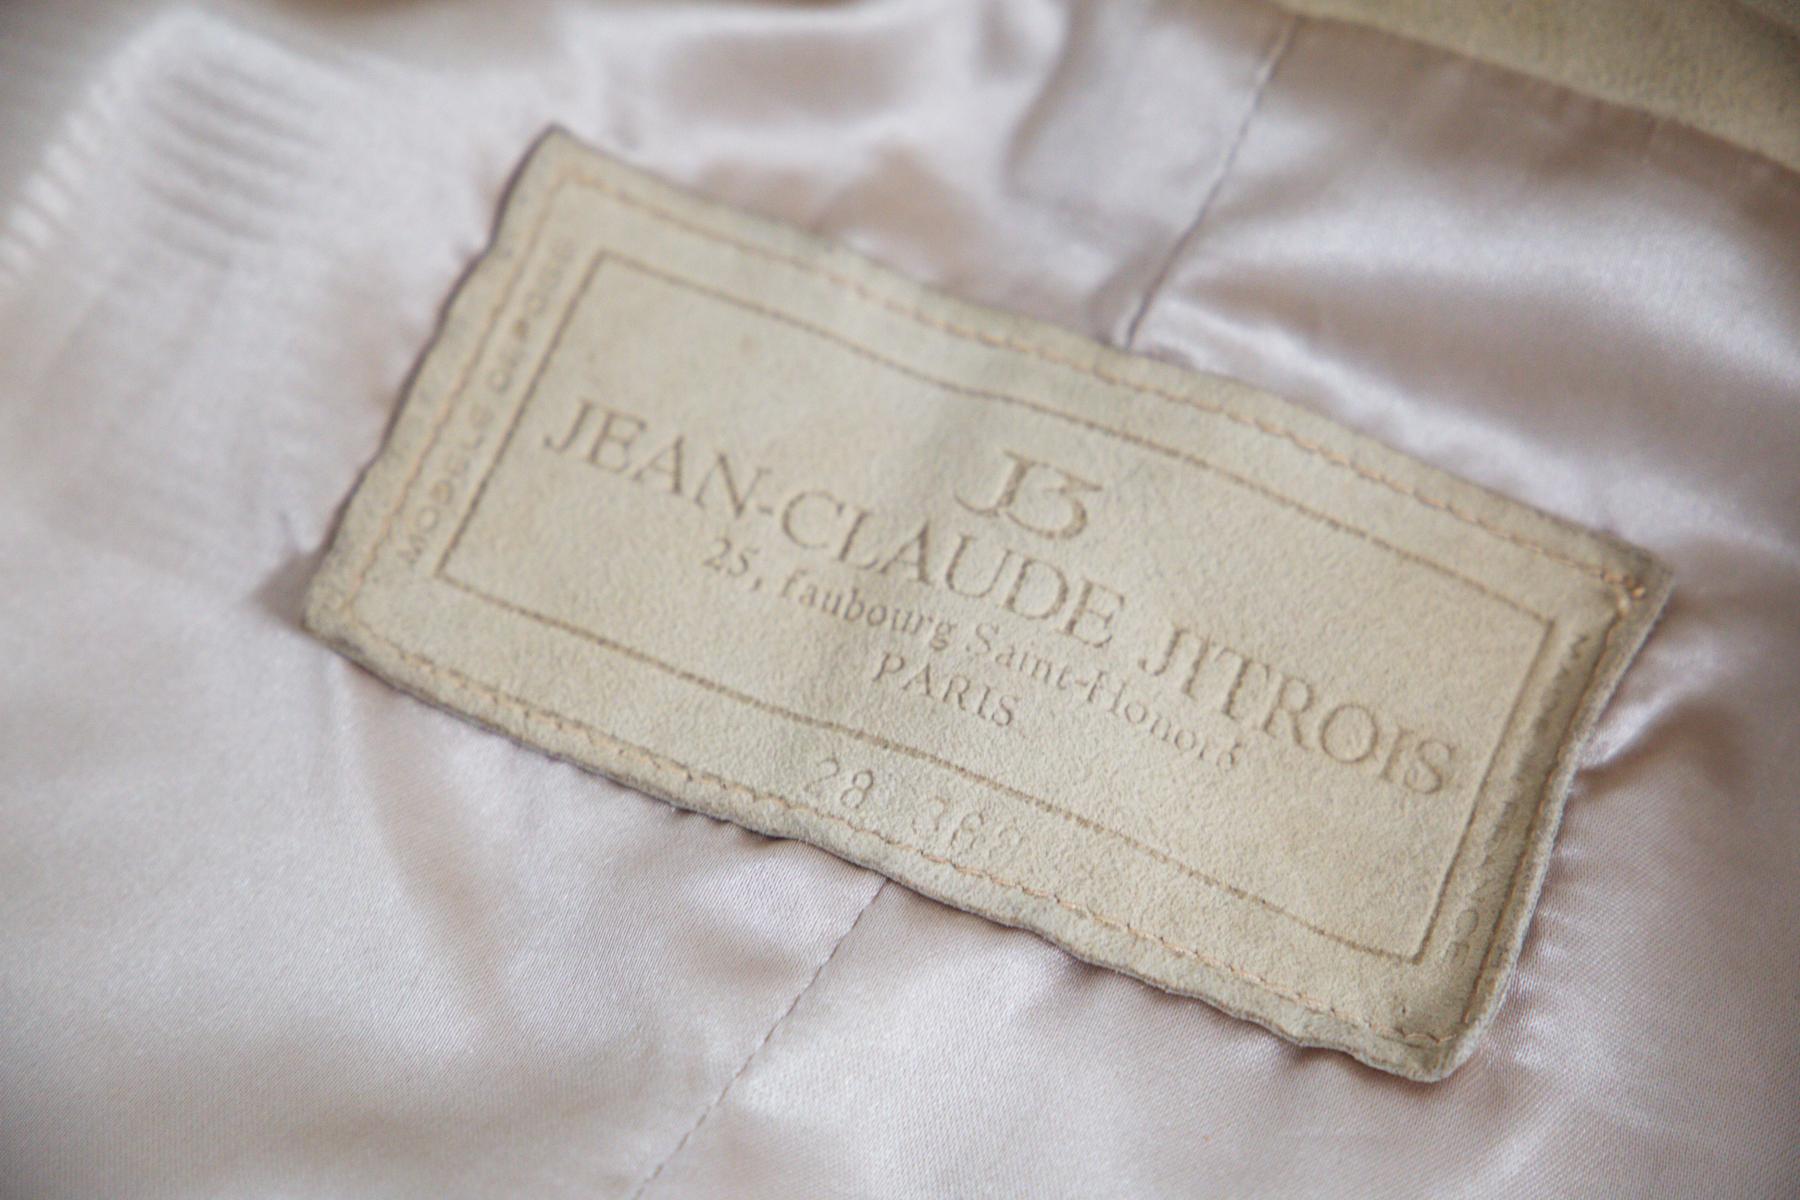 Lovely elegant short suede jacket designed by Jean-Claude Jitrois in the 1980s, made in France.
The jacket is entirely made of suede leather, very elegant, in beige color. The stud is short above the navel, has long sleeves and an open stand